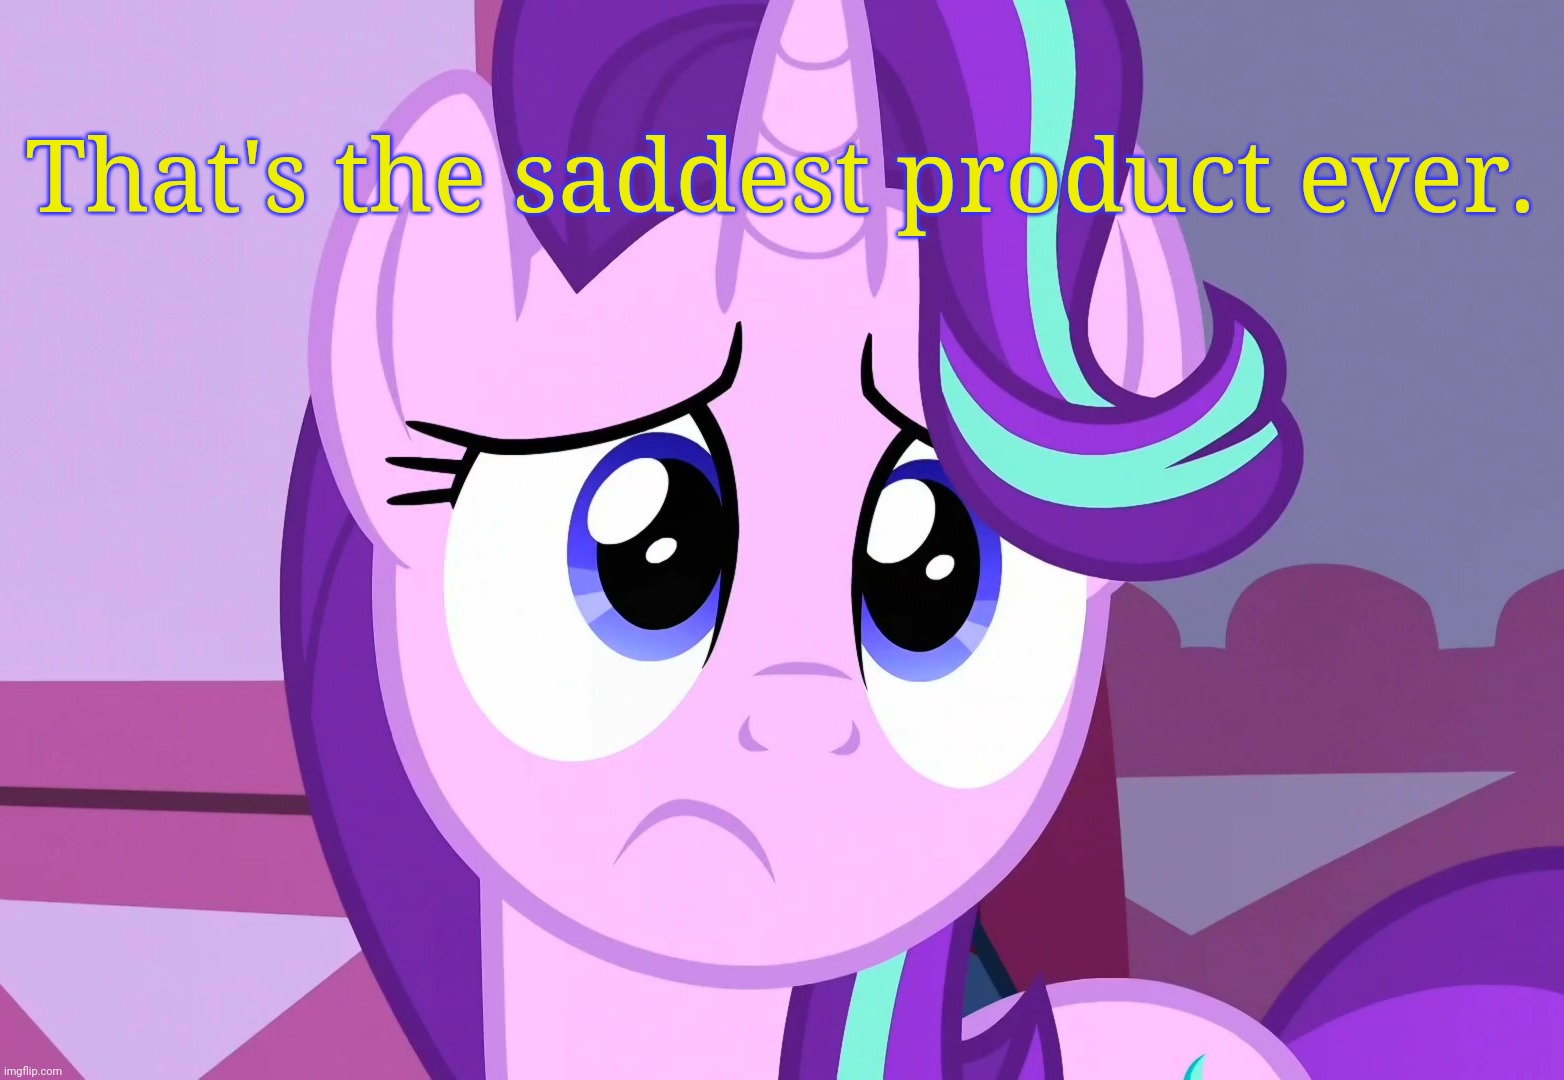 Sadlight Glimmer (MLP) | That's the saddest product ever. | image tagged in sadlight glimmer mlp | made w/ Imgflip meme maker